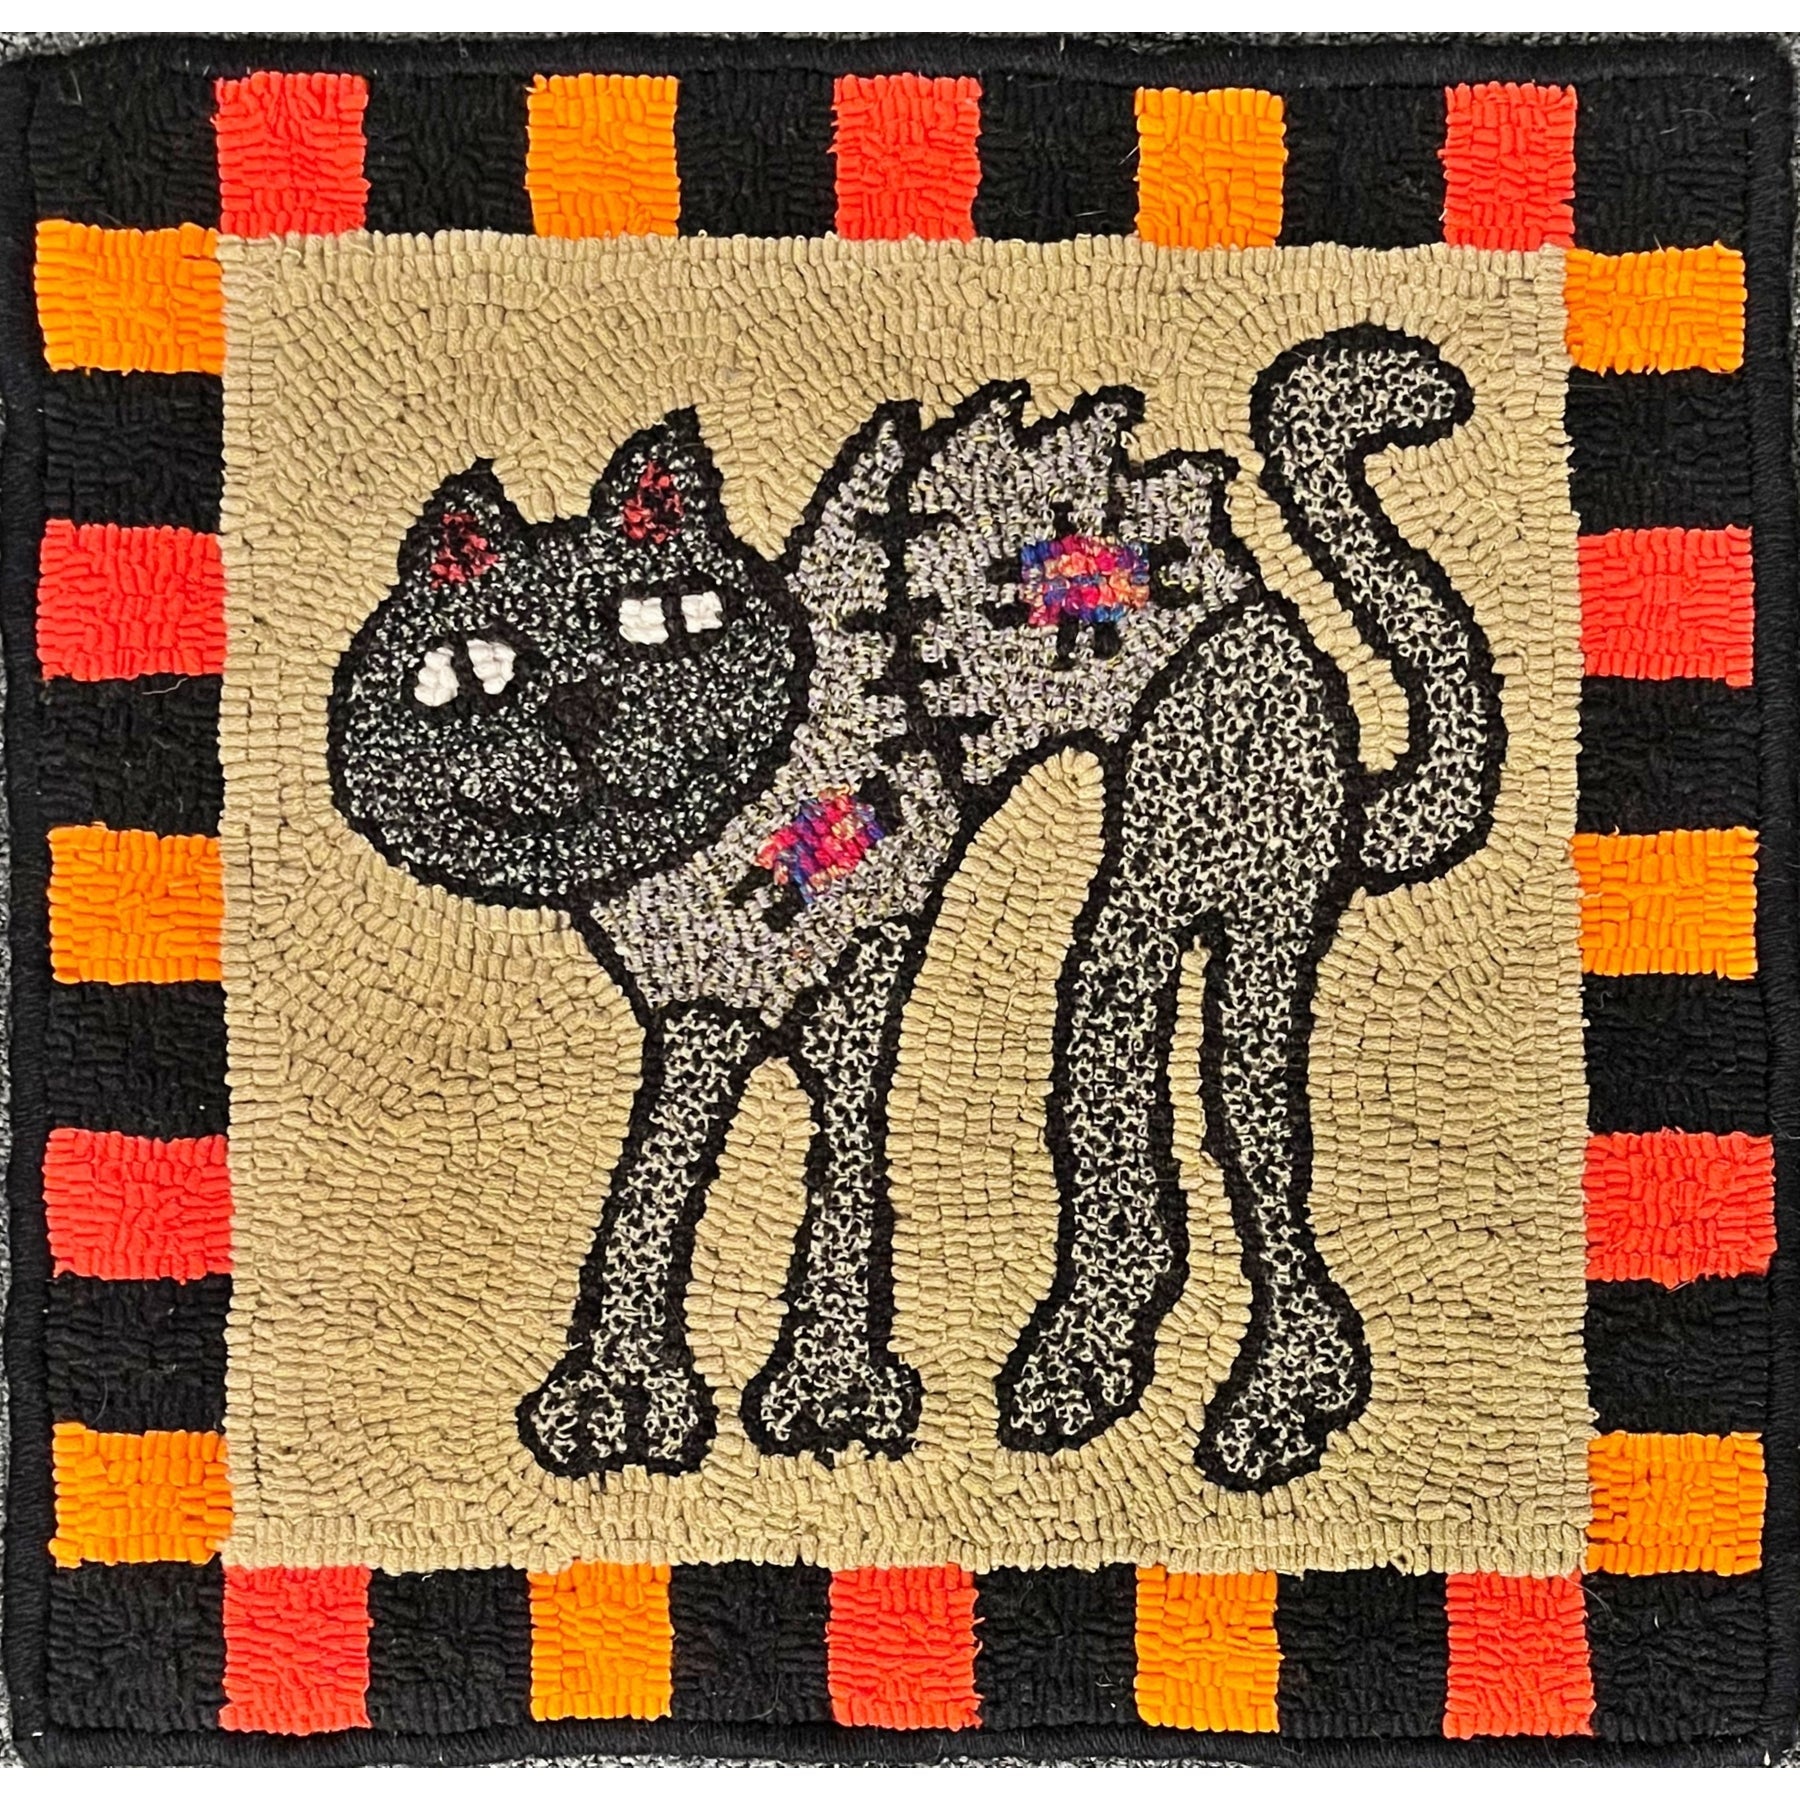 Patches the Cat, rug hooked by Judy Peluso